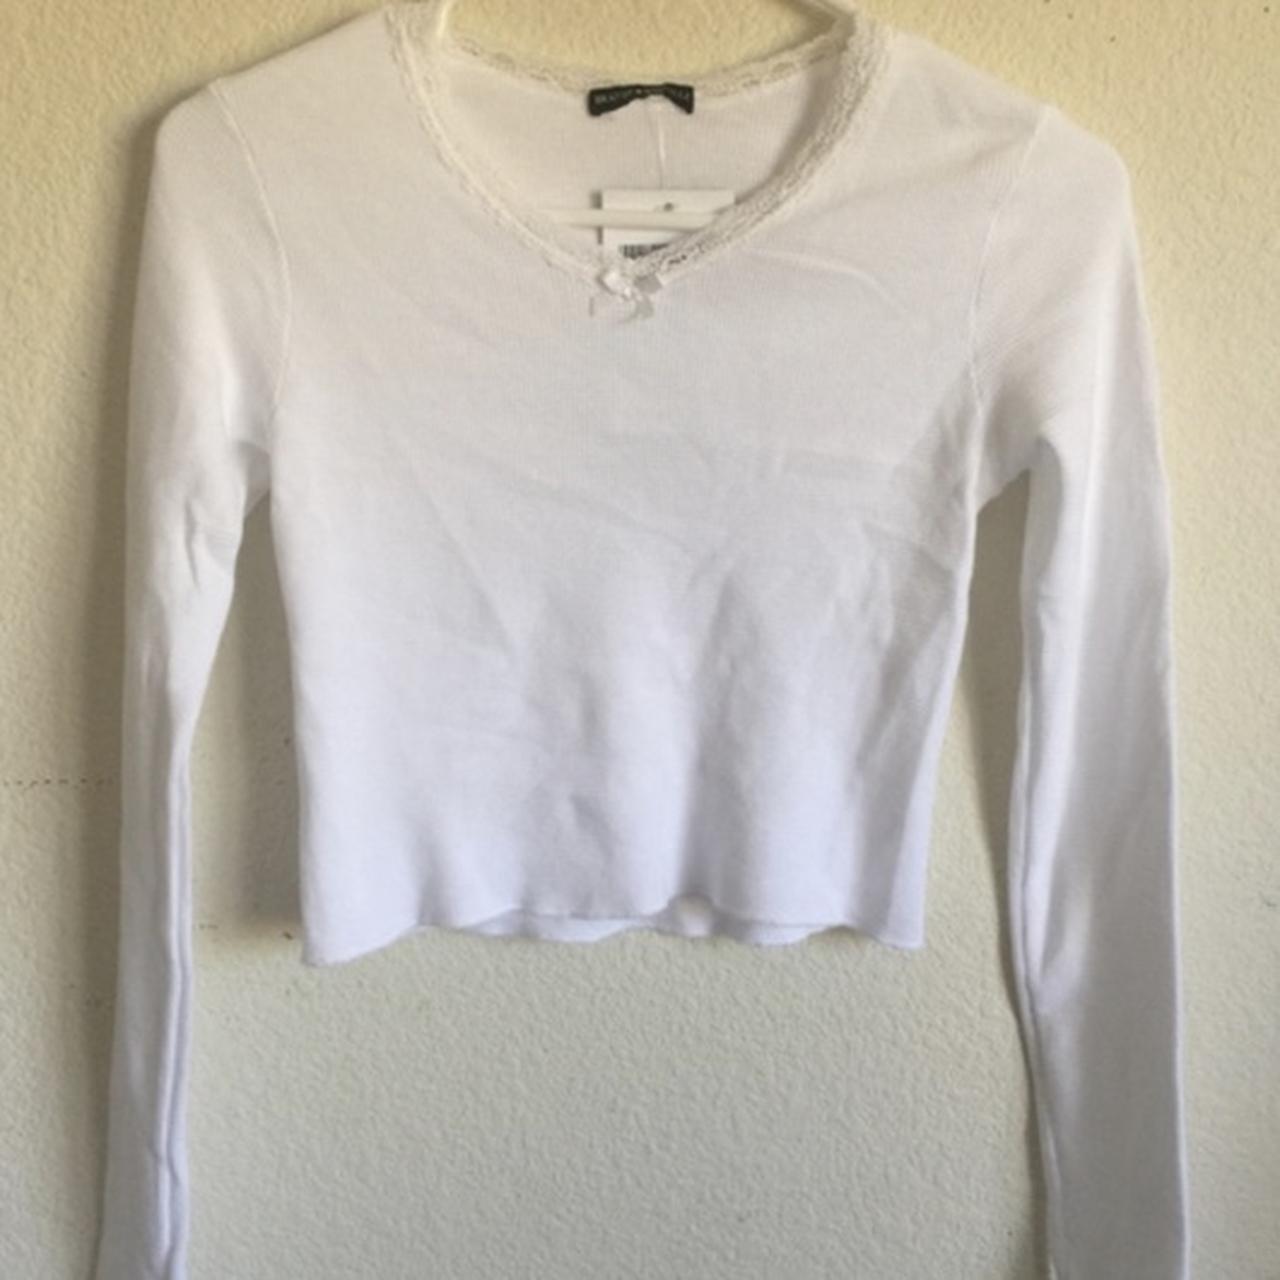 Brandy Melville white long sleeve Sonia thermal top